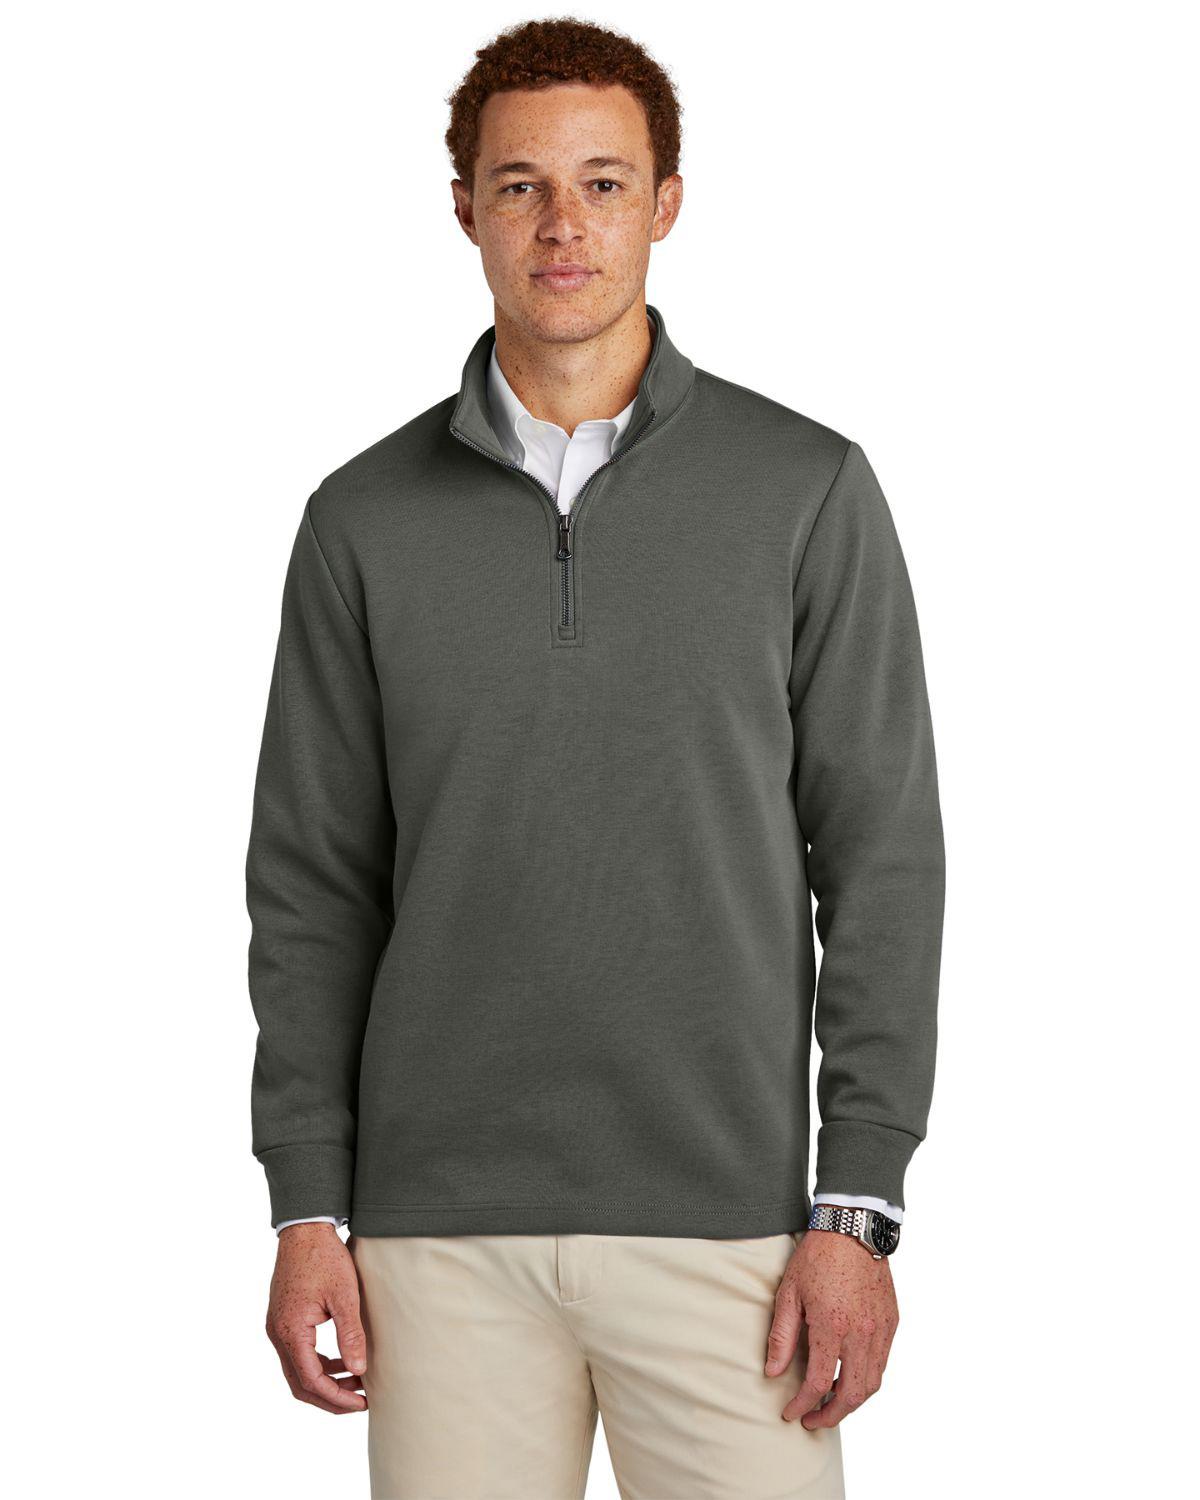 Brooks Brothers BB18206 Double-Knit 1/4-Zip